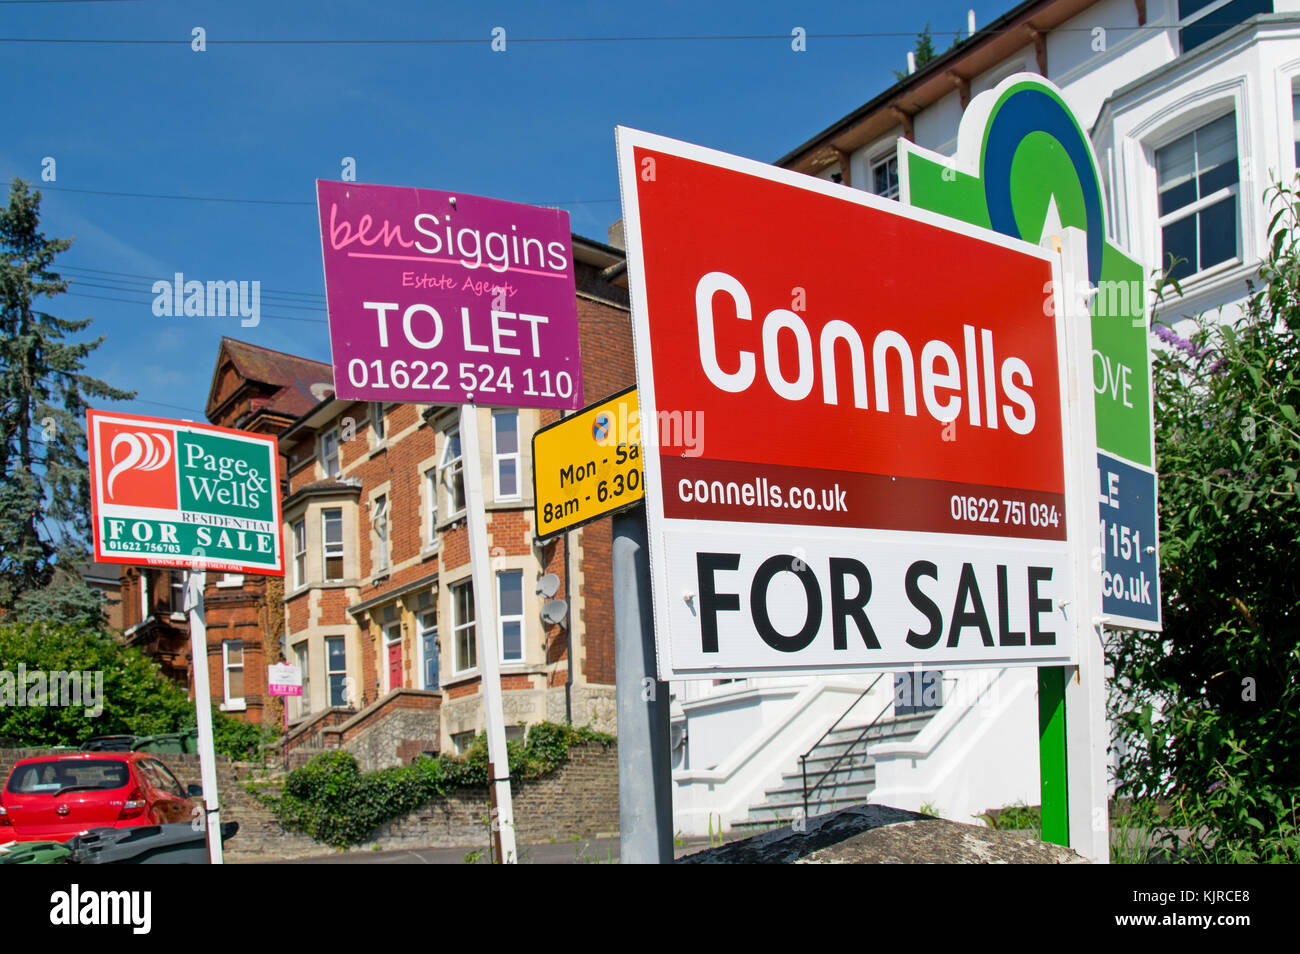 Maidstone, Kent, England, UK. For Sale and To Let property signs Stock Photo